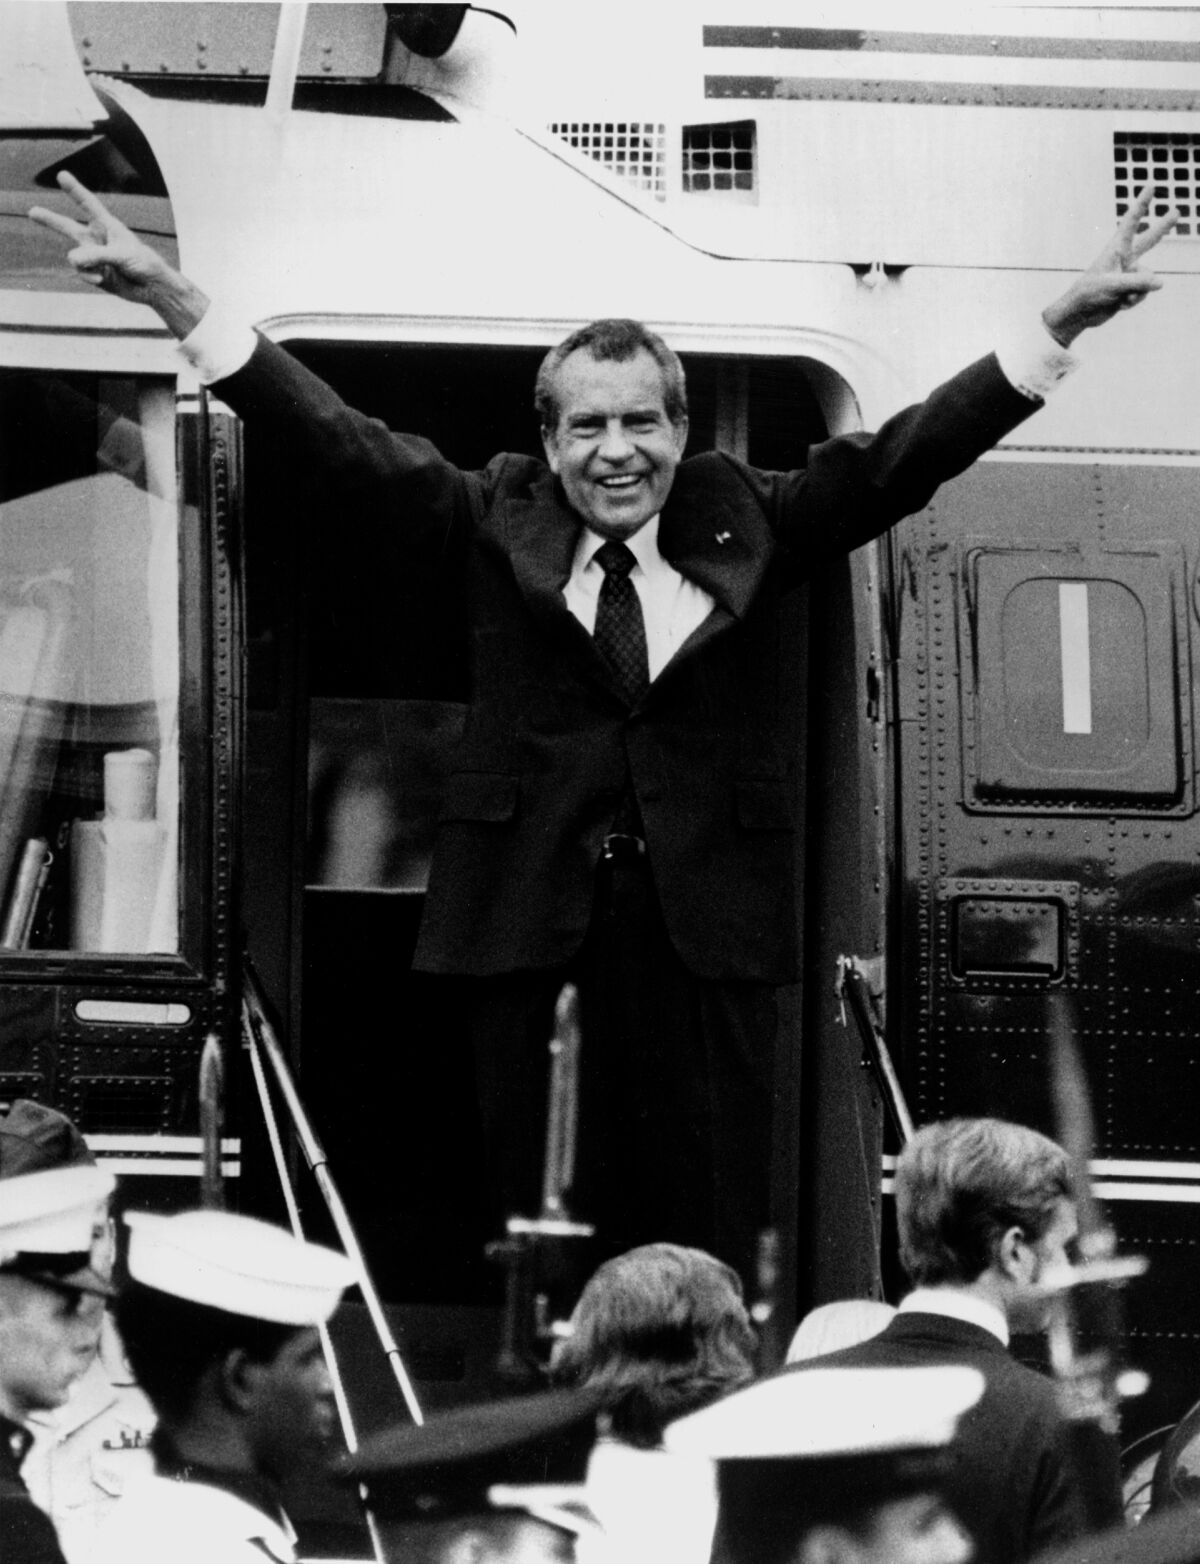 Richard Nixon gives a victorious salute after resigning the presidency on Aug. 9, 1974. His resignation led to reforms.